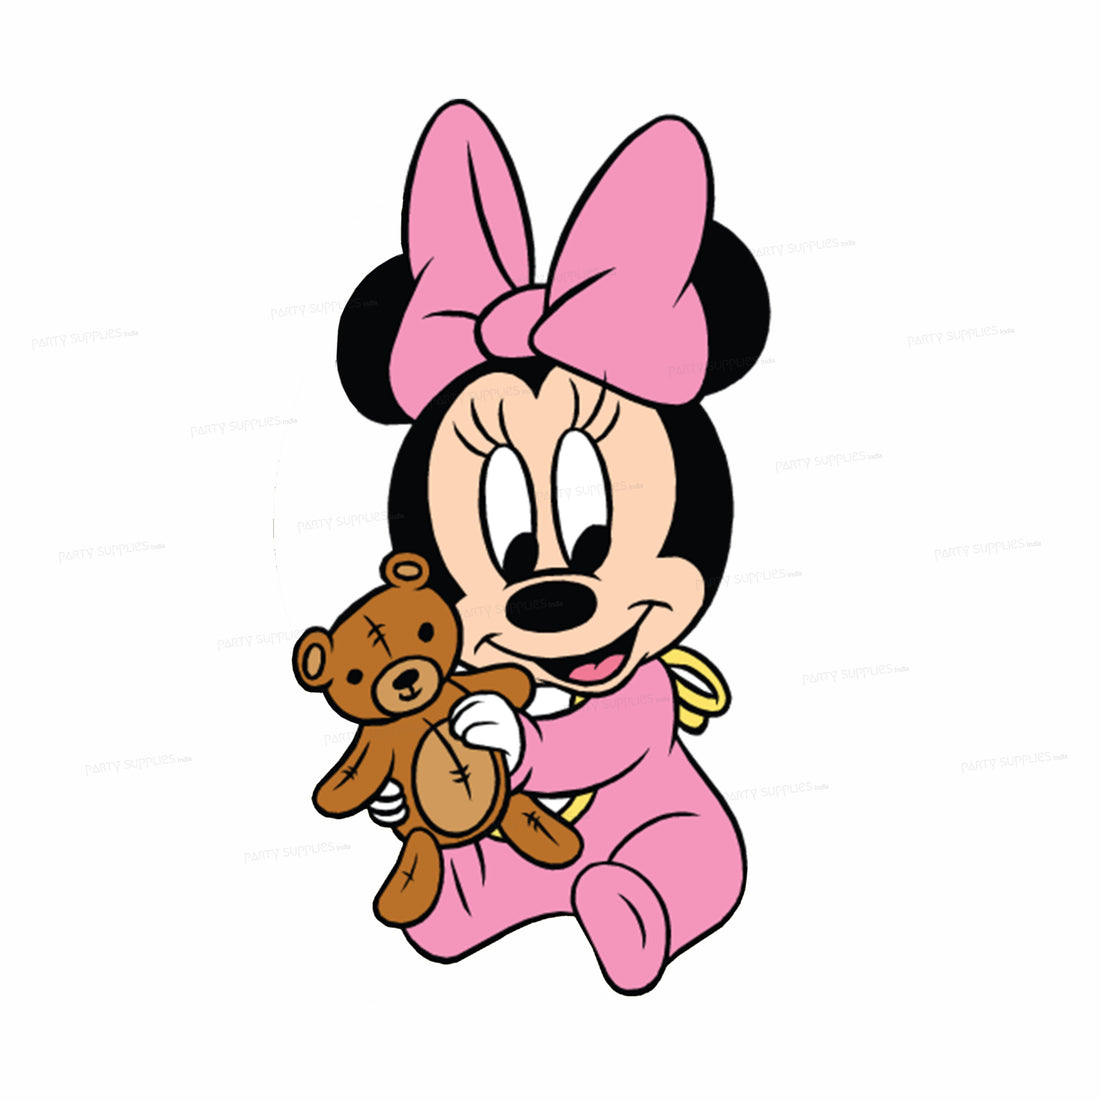 Minnie Mouse with doll Theme Cutout